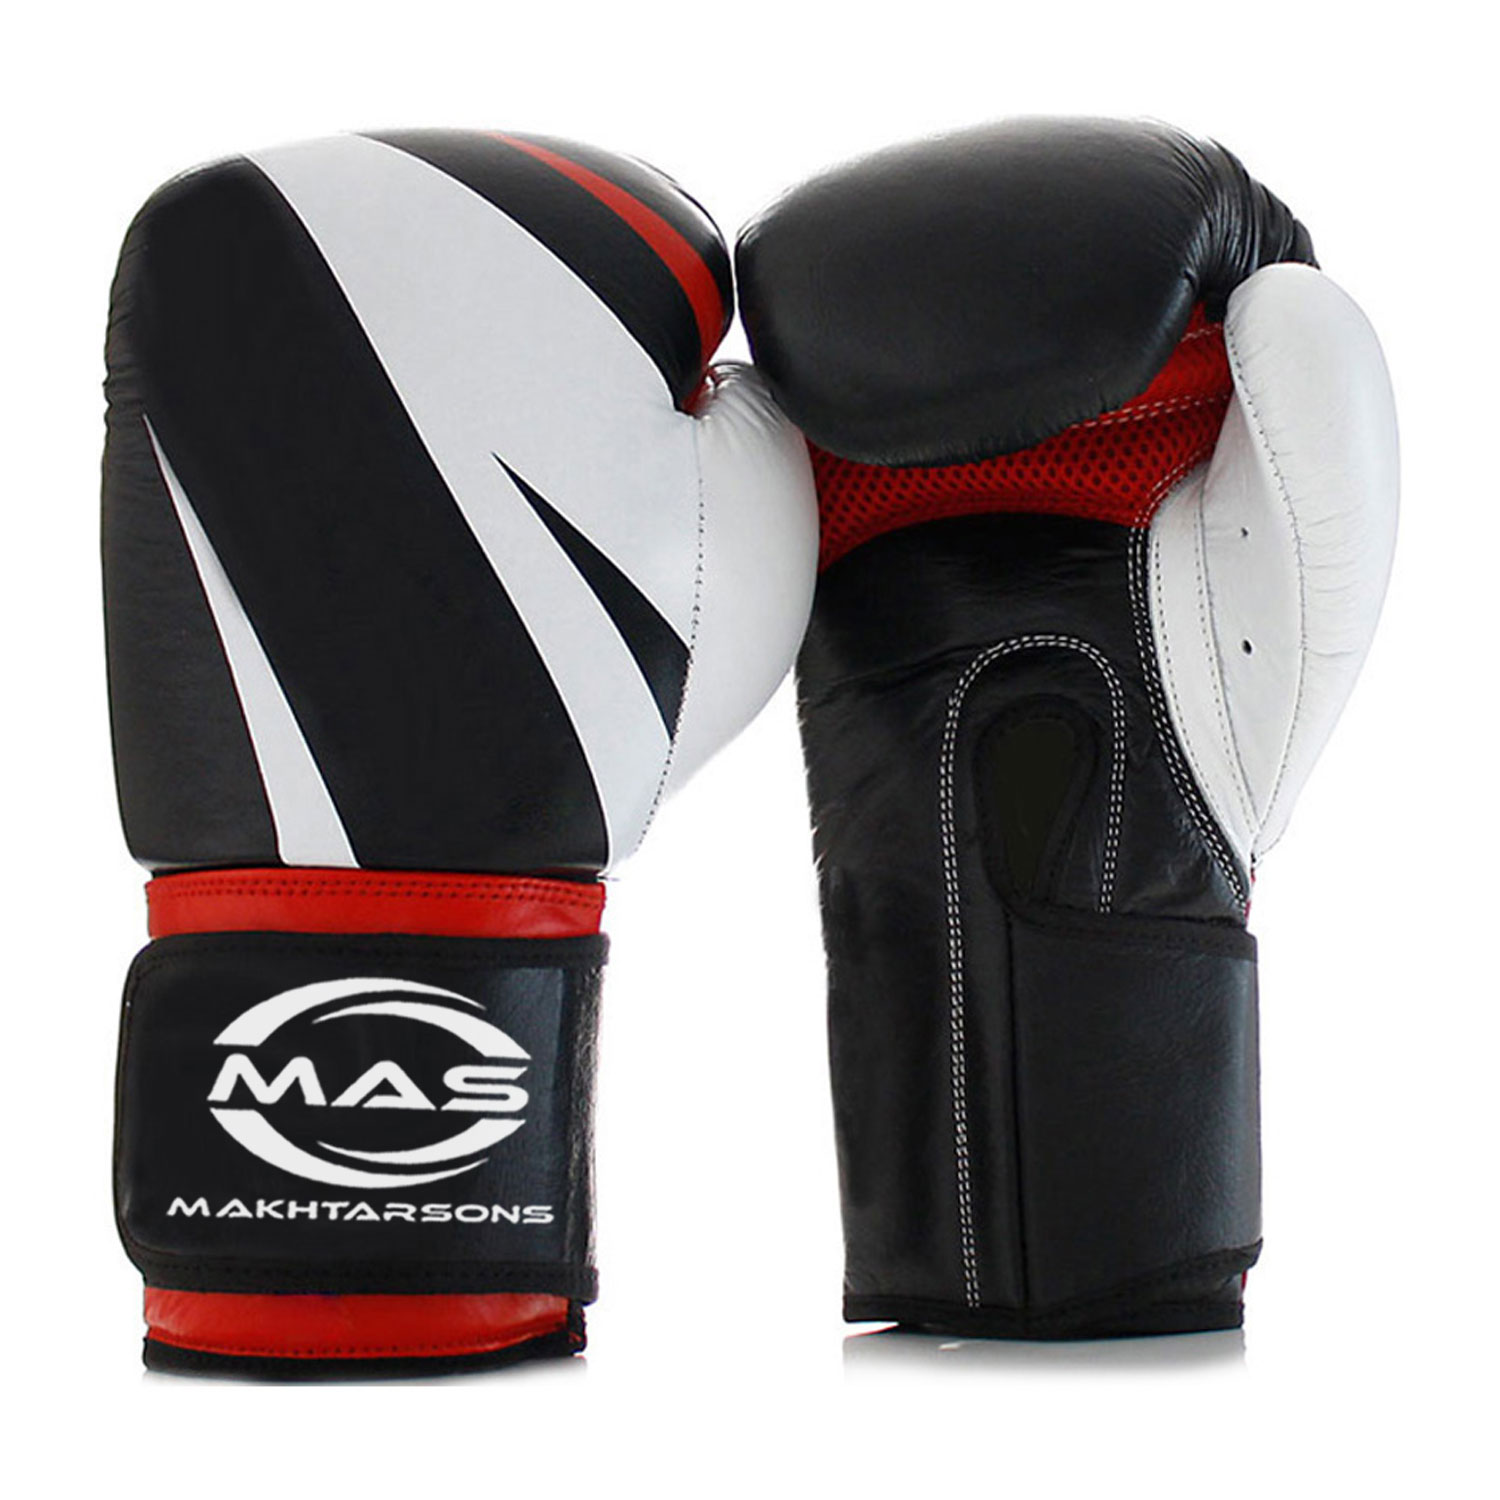 PROFESSIONAL BOXING GLOVES | MAS 204